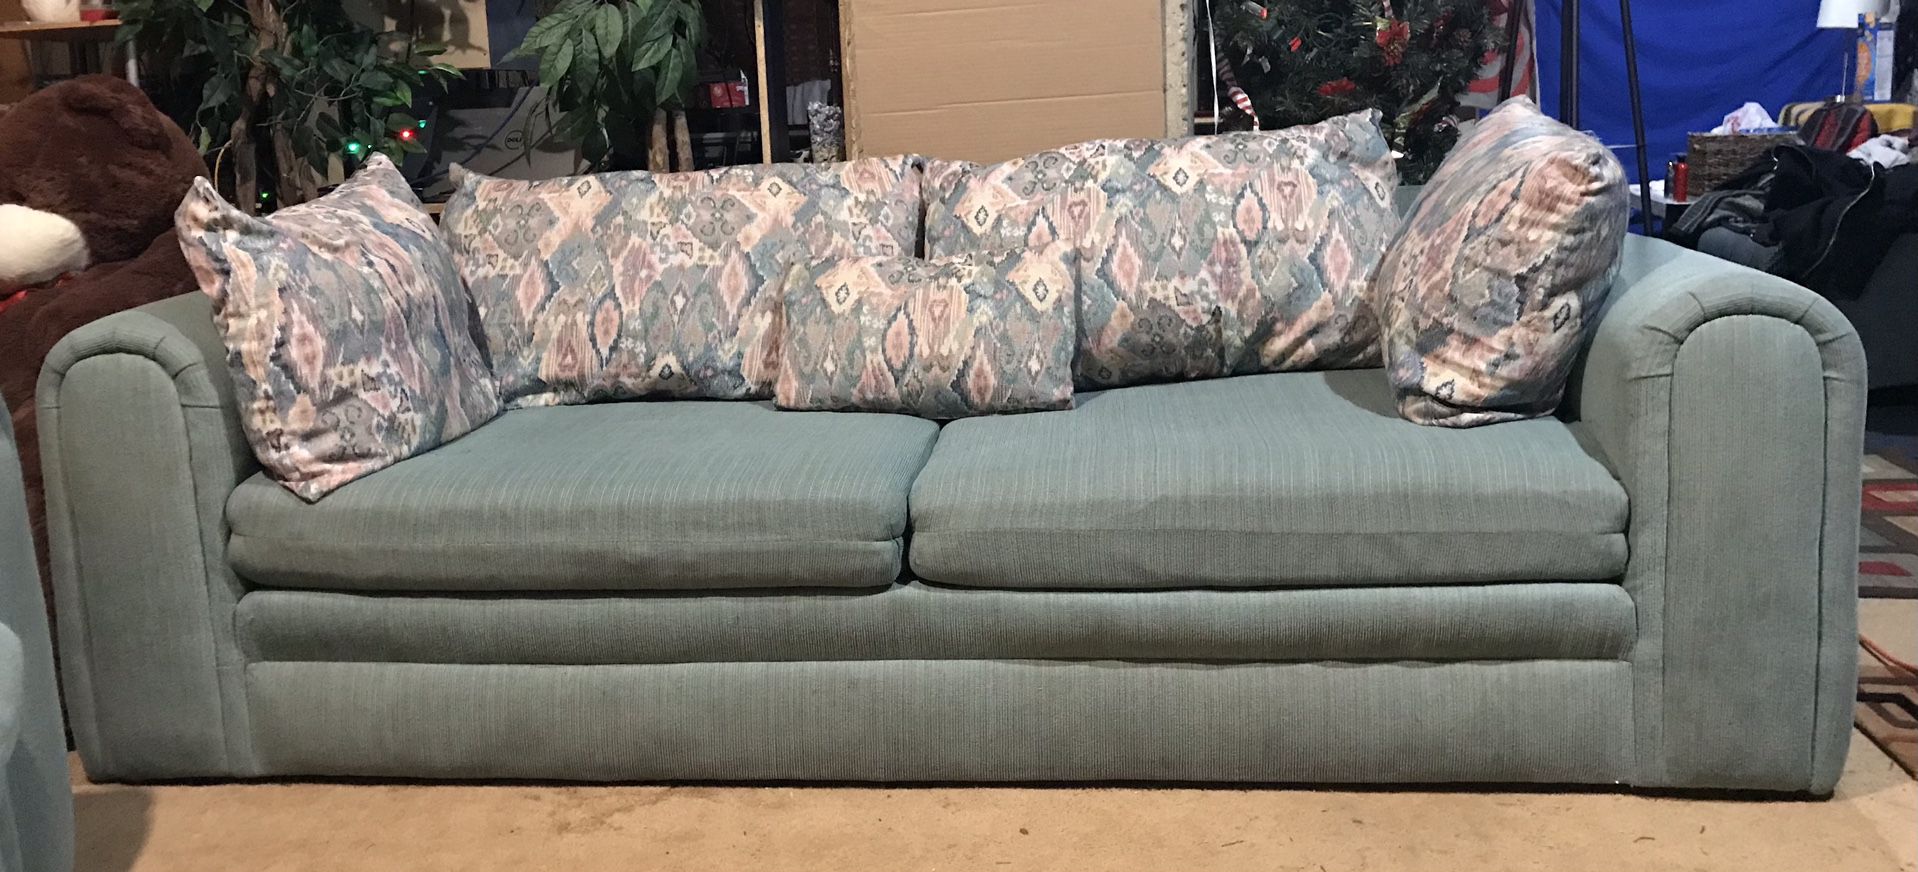 2 Matching Couches Seafoam Green Large Pillows 93” Long